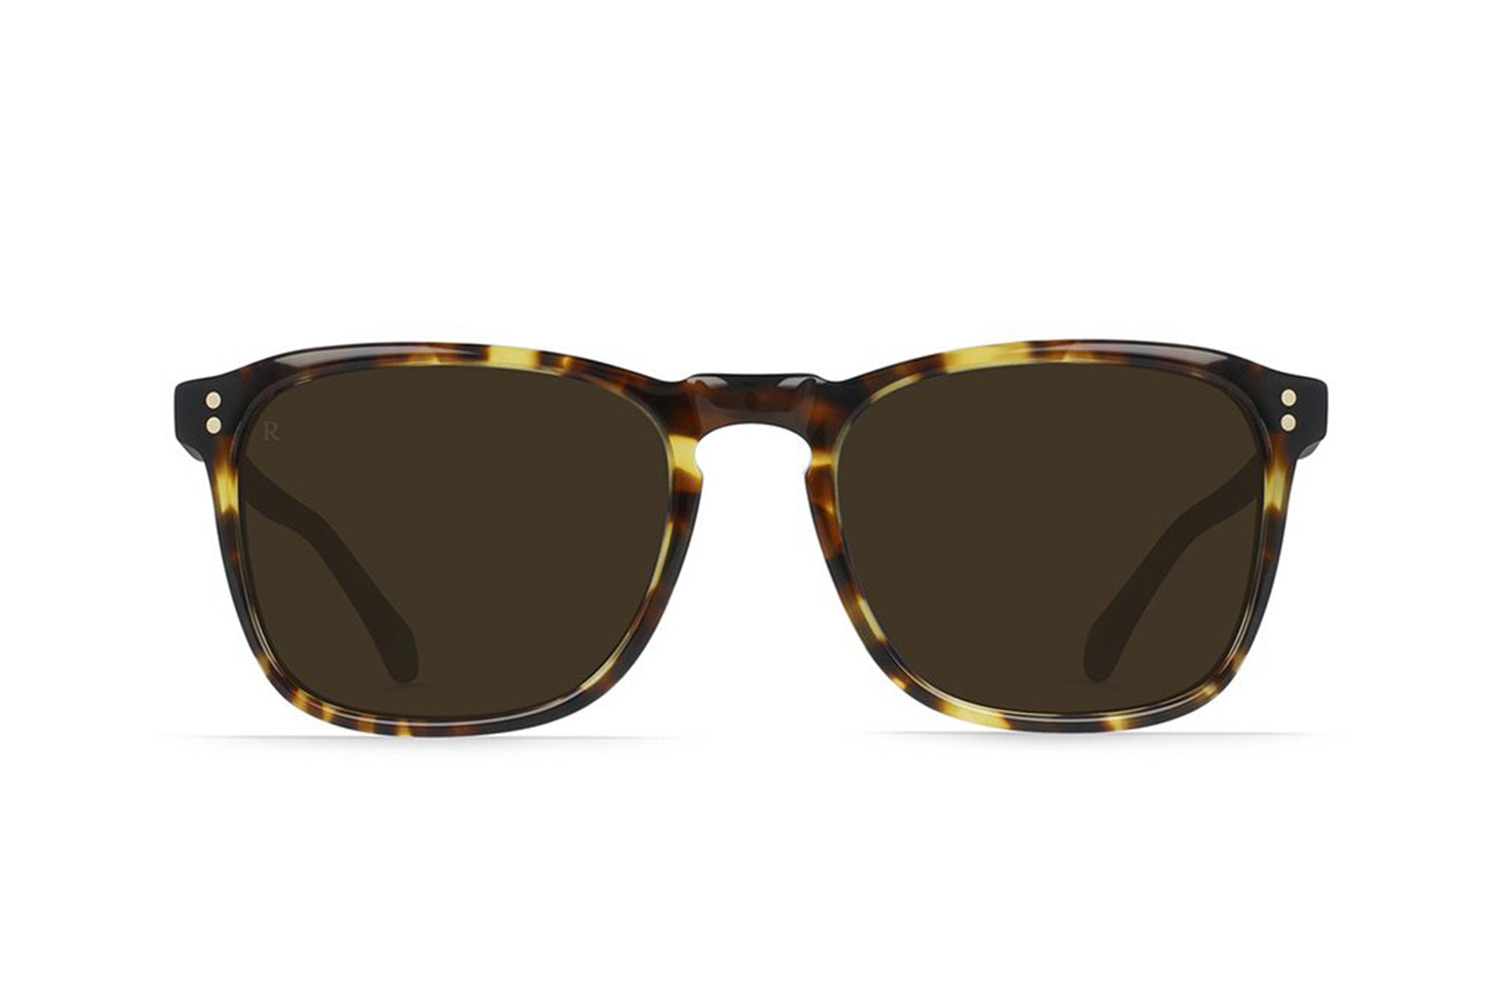 Shades of Cool: A Guide to the Best Winter Sunglasses for Men - The Manual